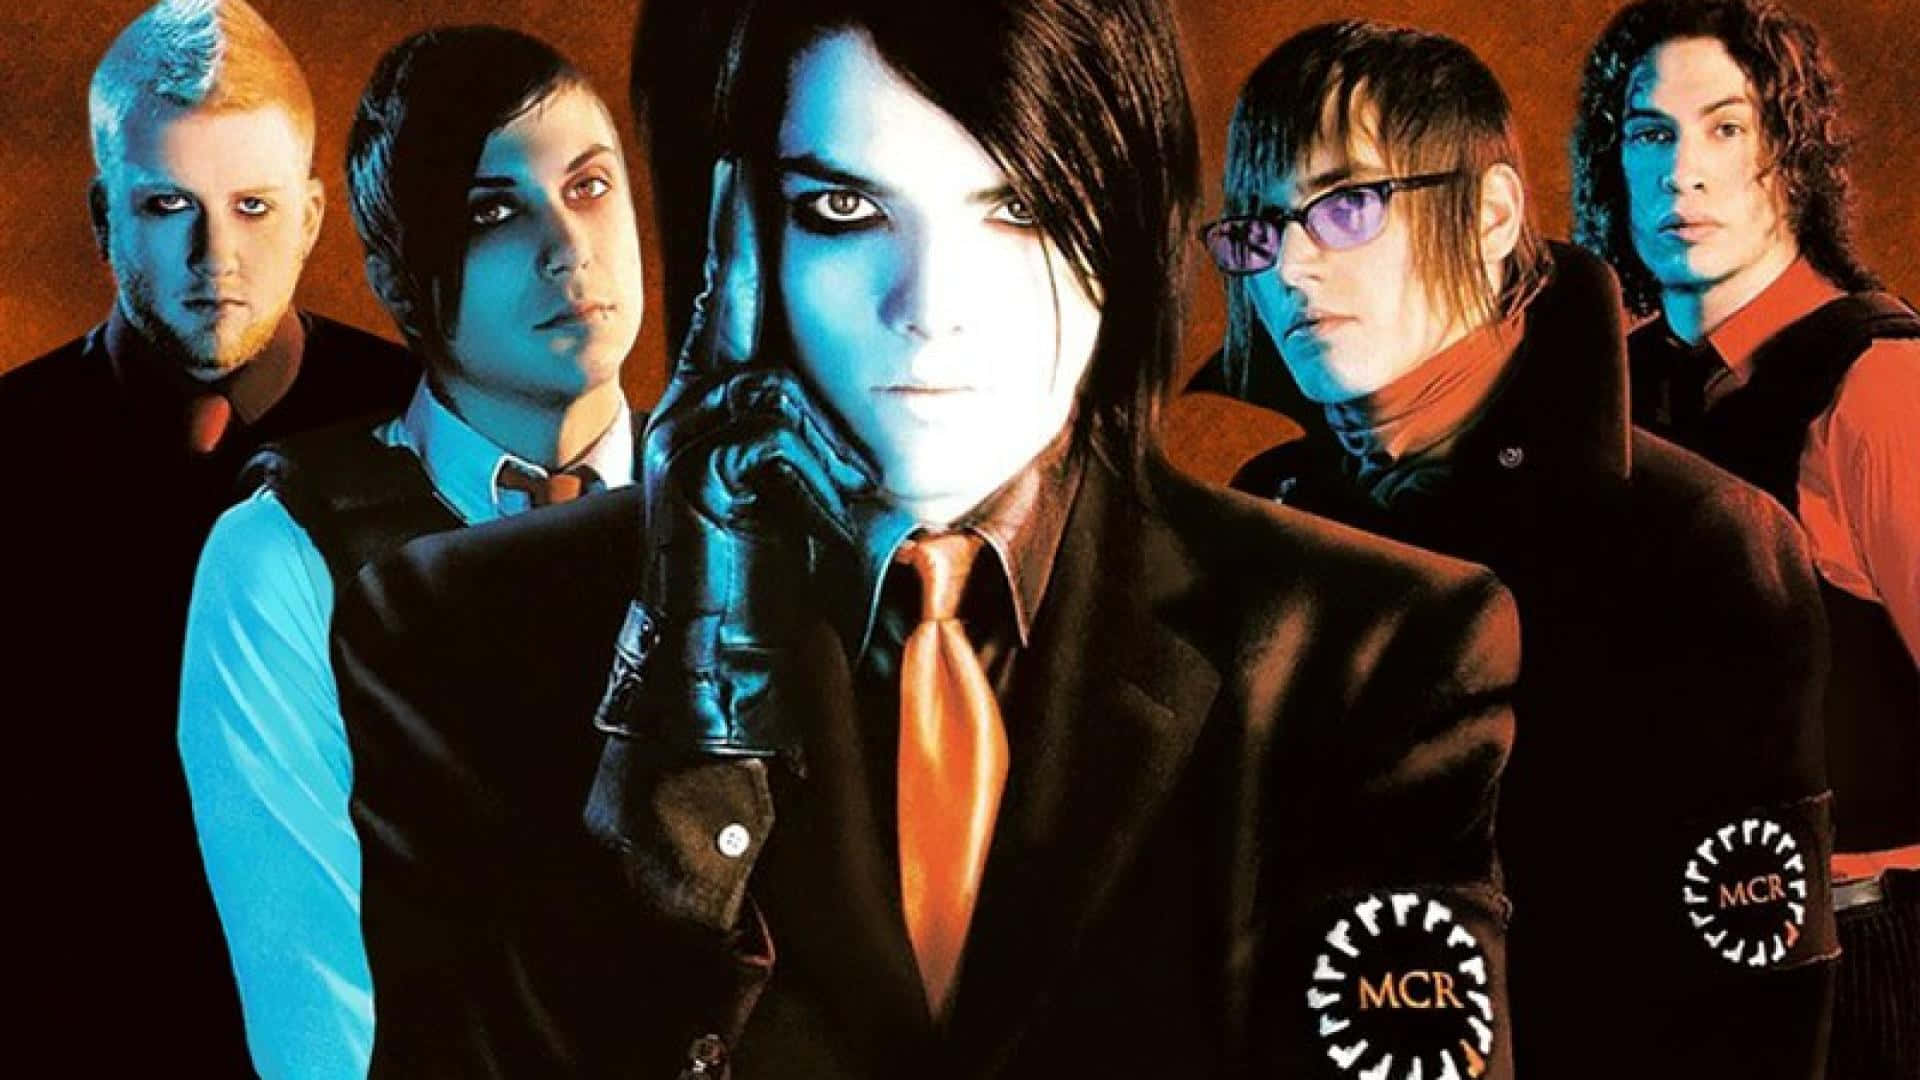 My Chemical Romance Wallpapers  Top Free My Chemical Romance Backgrounds   WallpaperAccess